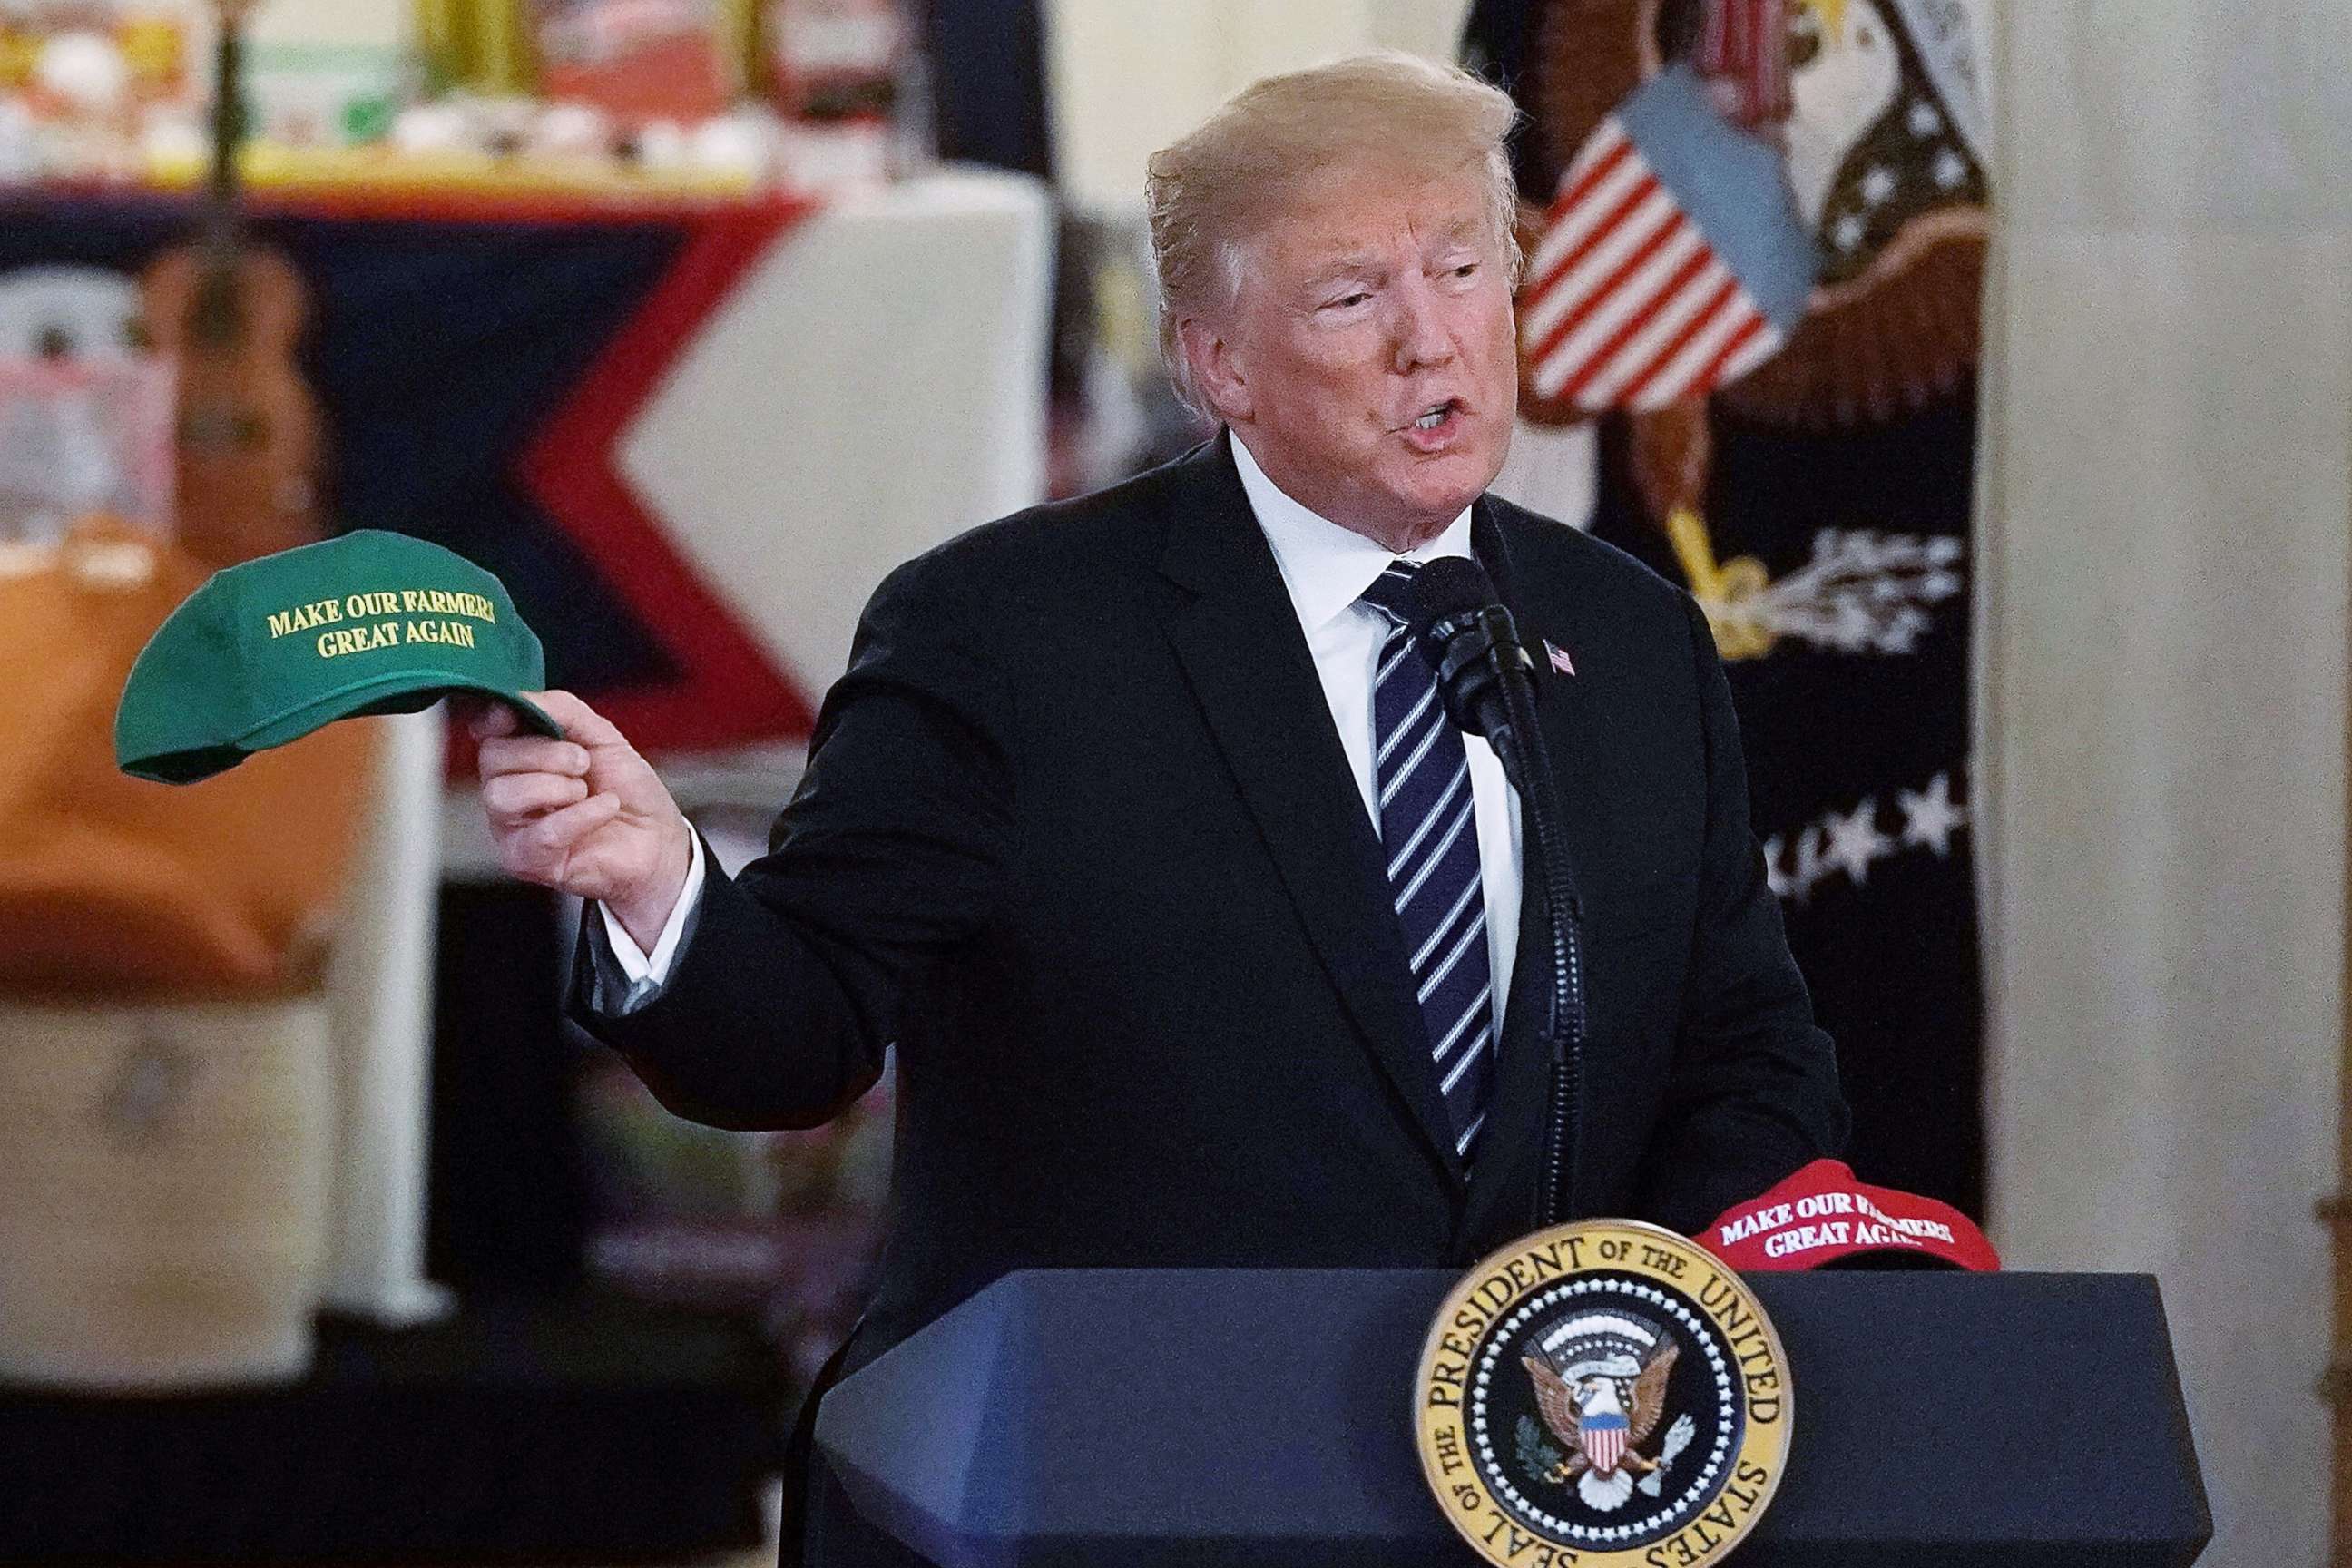 PHOTO: President Donald Trump holds up a "Make Our Farmers Great Again" hat as he speaks during the 2018 Made in America Product Showcase event, July 23, 2018, in the Cross Hall of the White House in Washington, D.C.